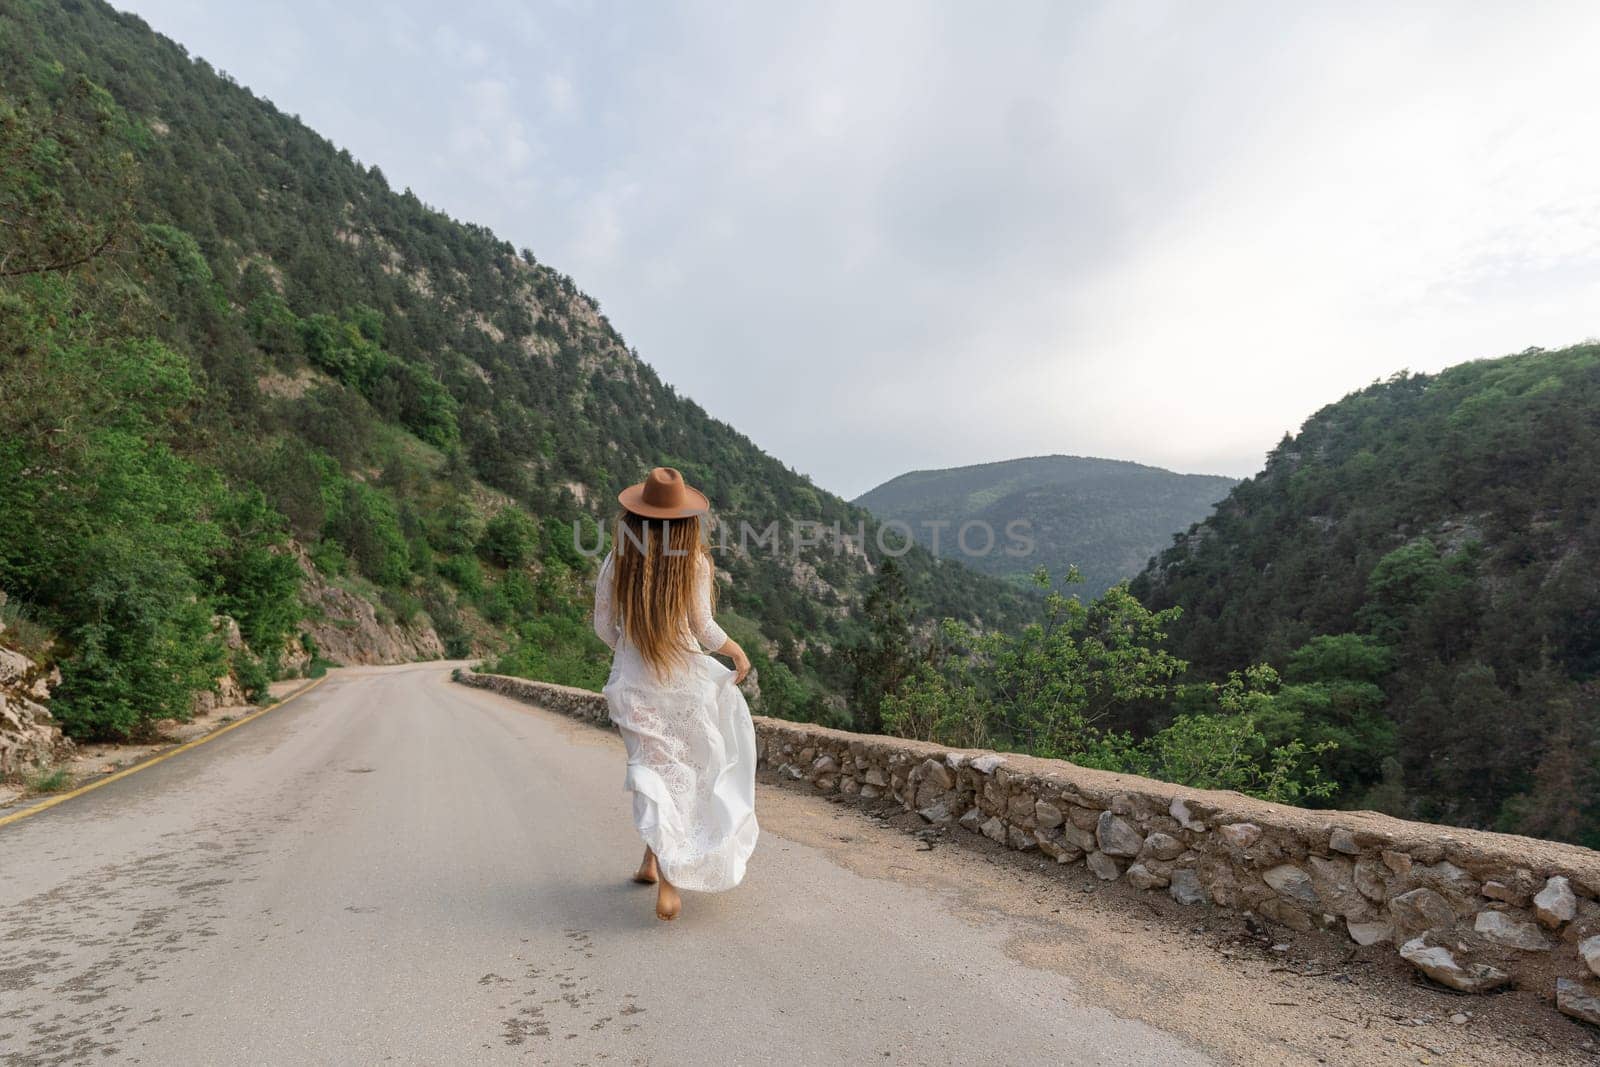 A woman in a white dress is walking down a road with a hat on. The road is surrounded by mountains and the sky is cloudy. The scene has a peaceful and serene mood. by Matiunina